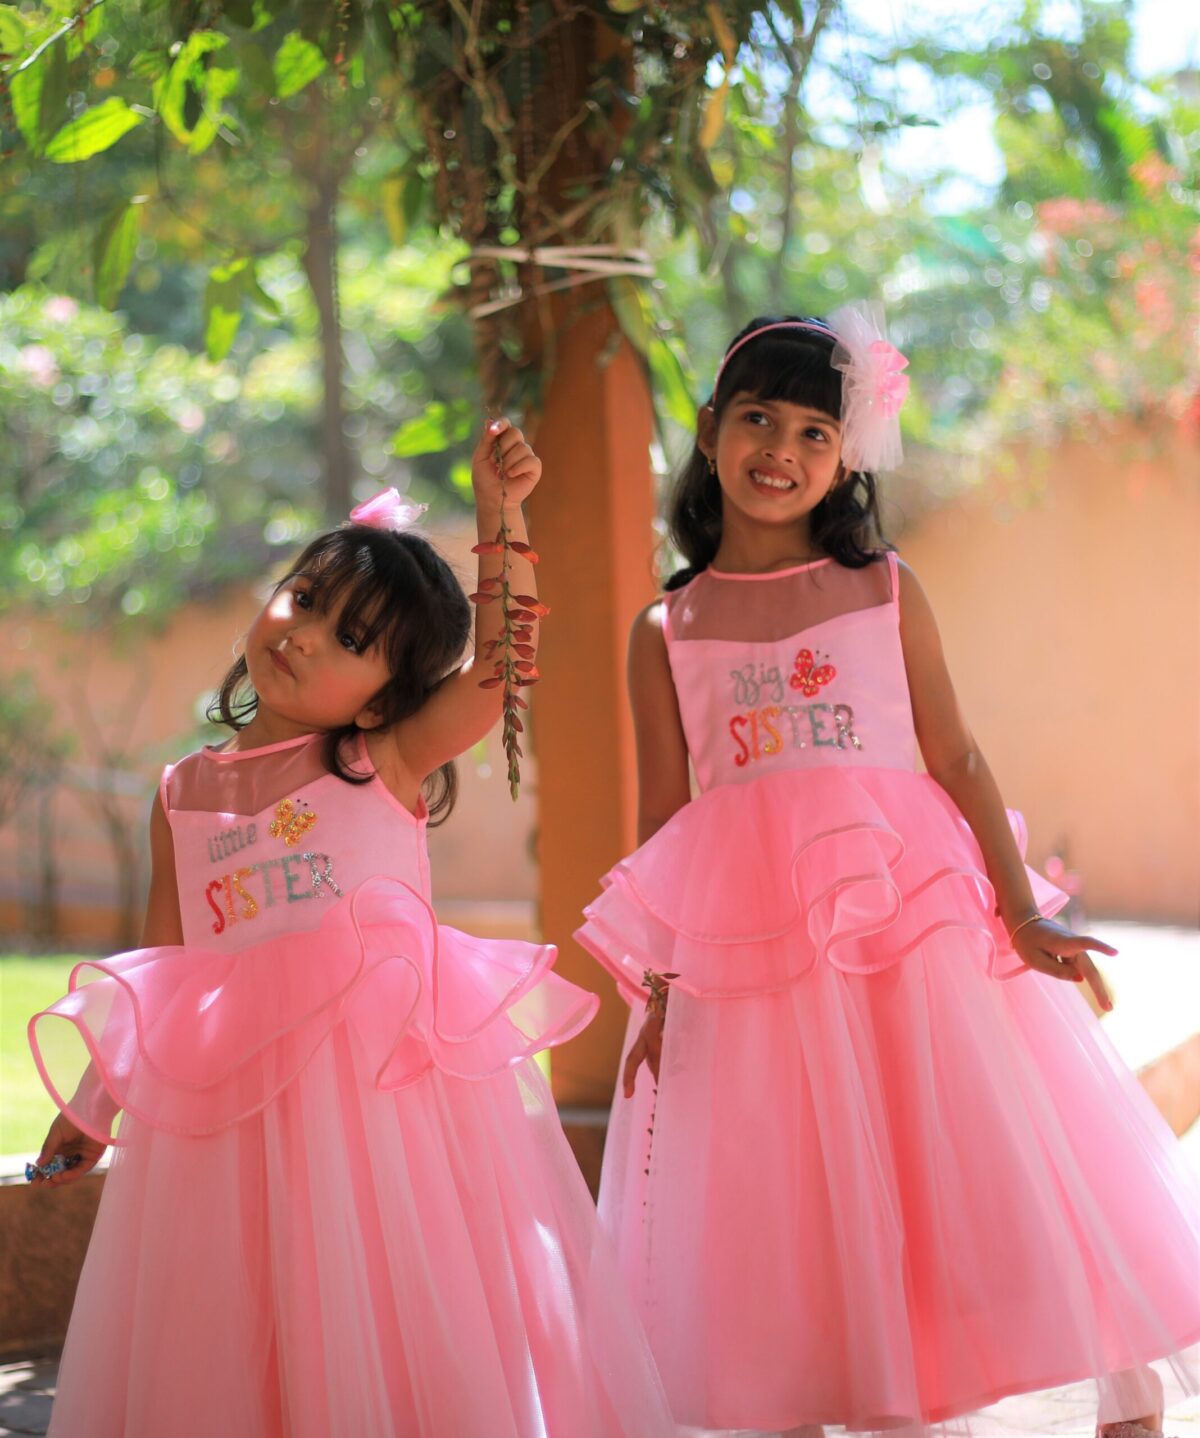 1M7A9588 1 scaled Little Sister Pink Ruffle Gown